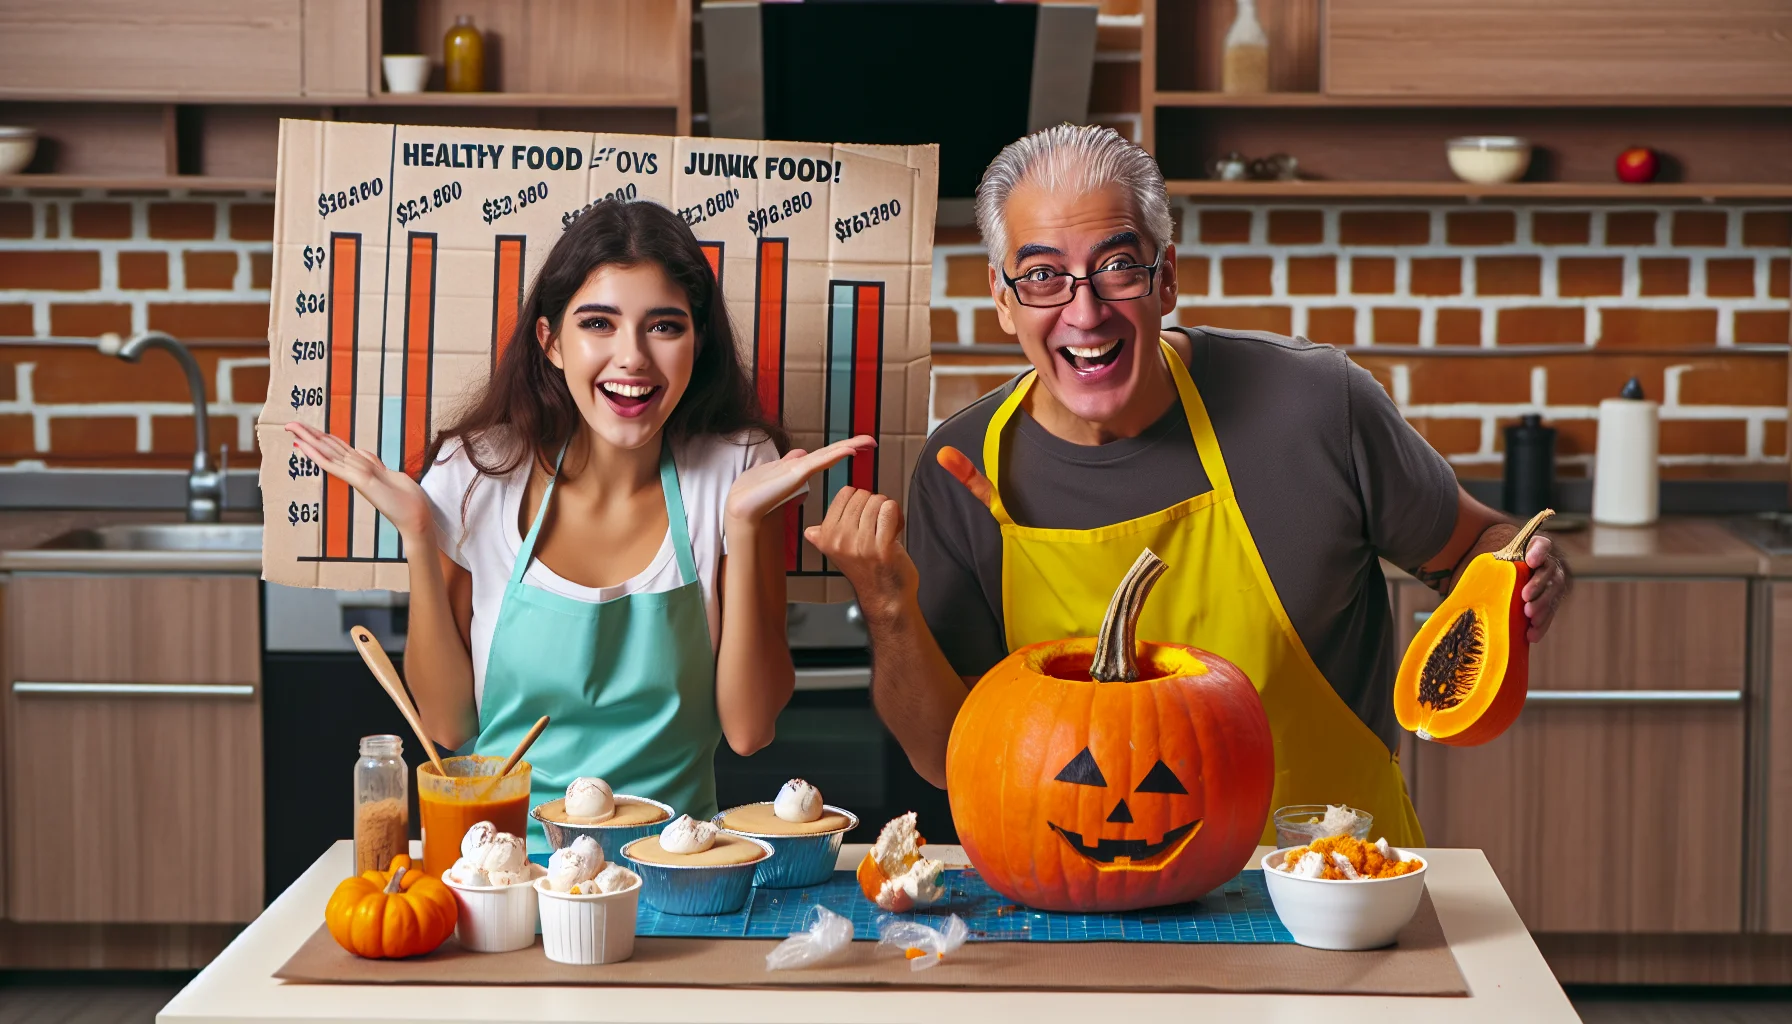 A funny and enticing image of a cooking challenge, specifically for a pumpkin ice cream pie. The scene is set in a comfortable home kitchen with a couple of contestants: a young Hispanic female chef and an elderly Caucasian male chef, both wearing colorful aprons. They are playfully competing, making expressions of surprise and joy as they create their pies with the freshest and cheapest ingredients laid out on the table, including a prominently displayed pumpkin. There’s a fun-size chart in the background comparing the costs of healthy food versus junk food, making a compelling argument for eating healthily on a budget.